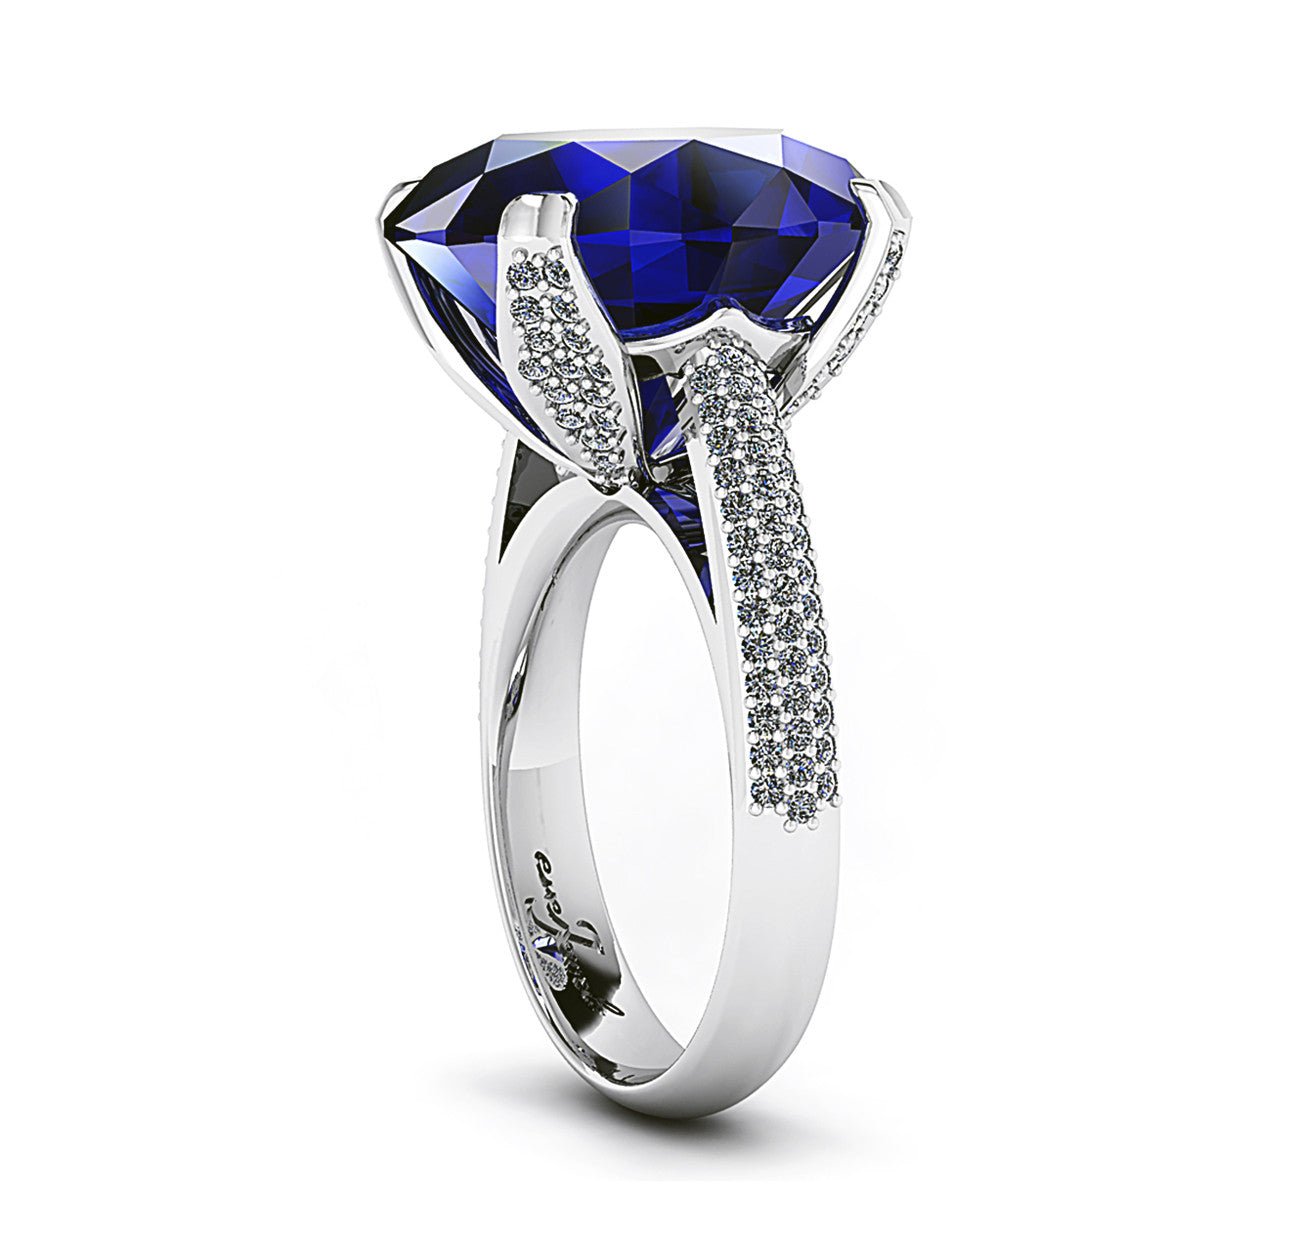 18ct White gold 15ct oval tanzanite dress ring claw set with pave diamonds - ForeverJewels Design Studio 8